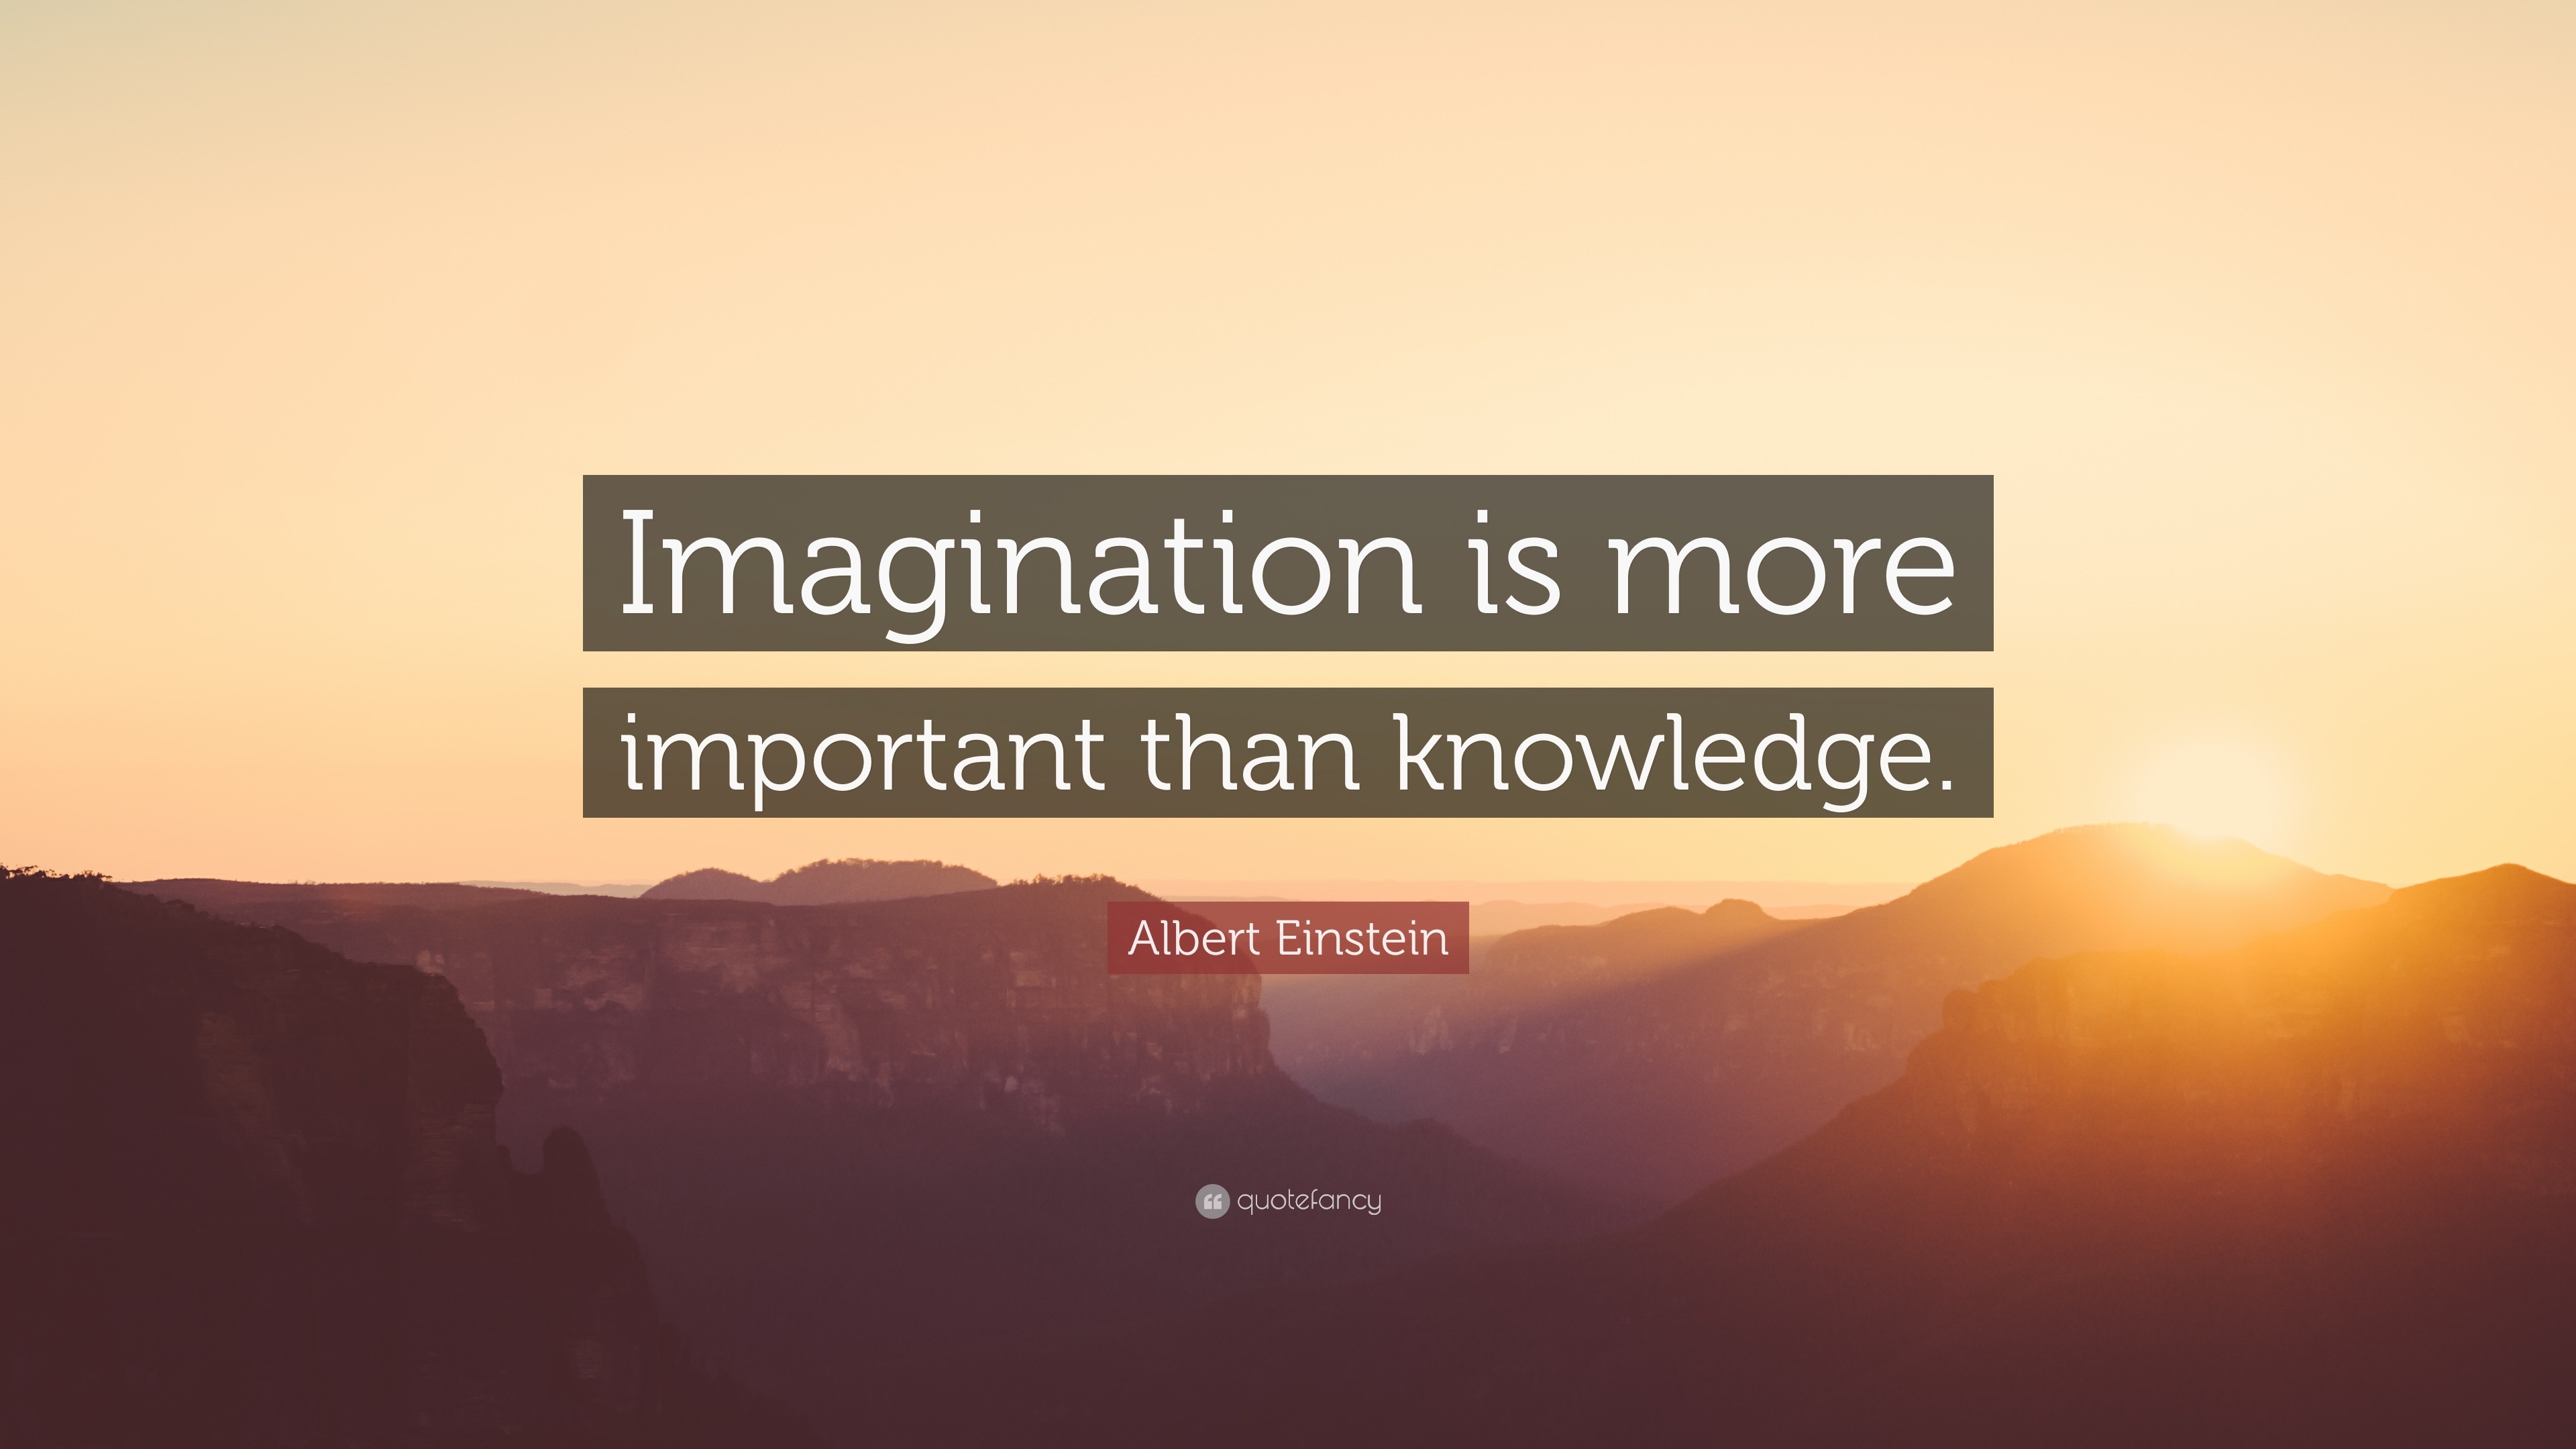 Albert Einstein Quote: "Imagination is more important than ...